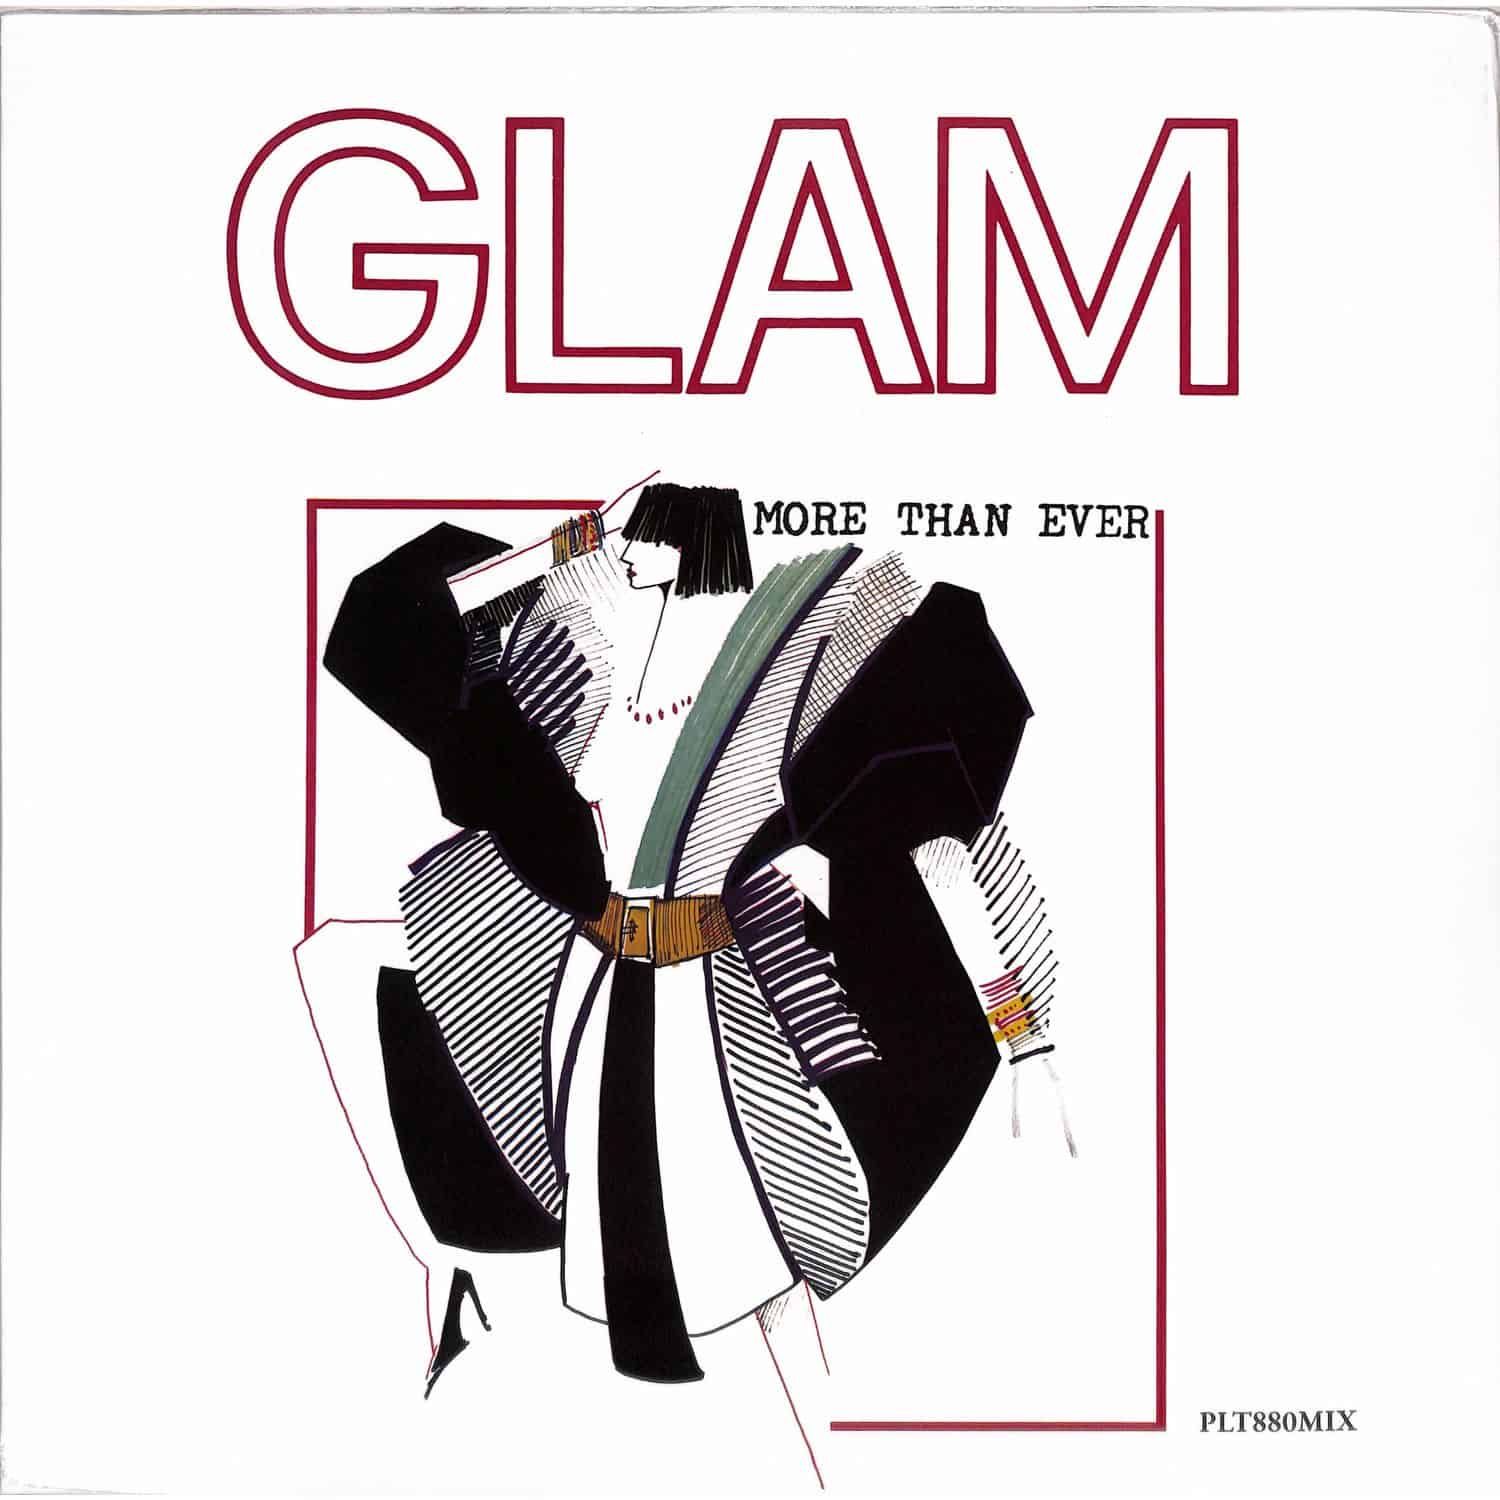 Glam - MORE THAN EVER